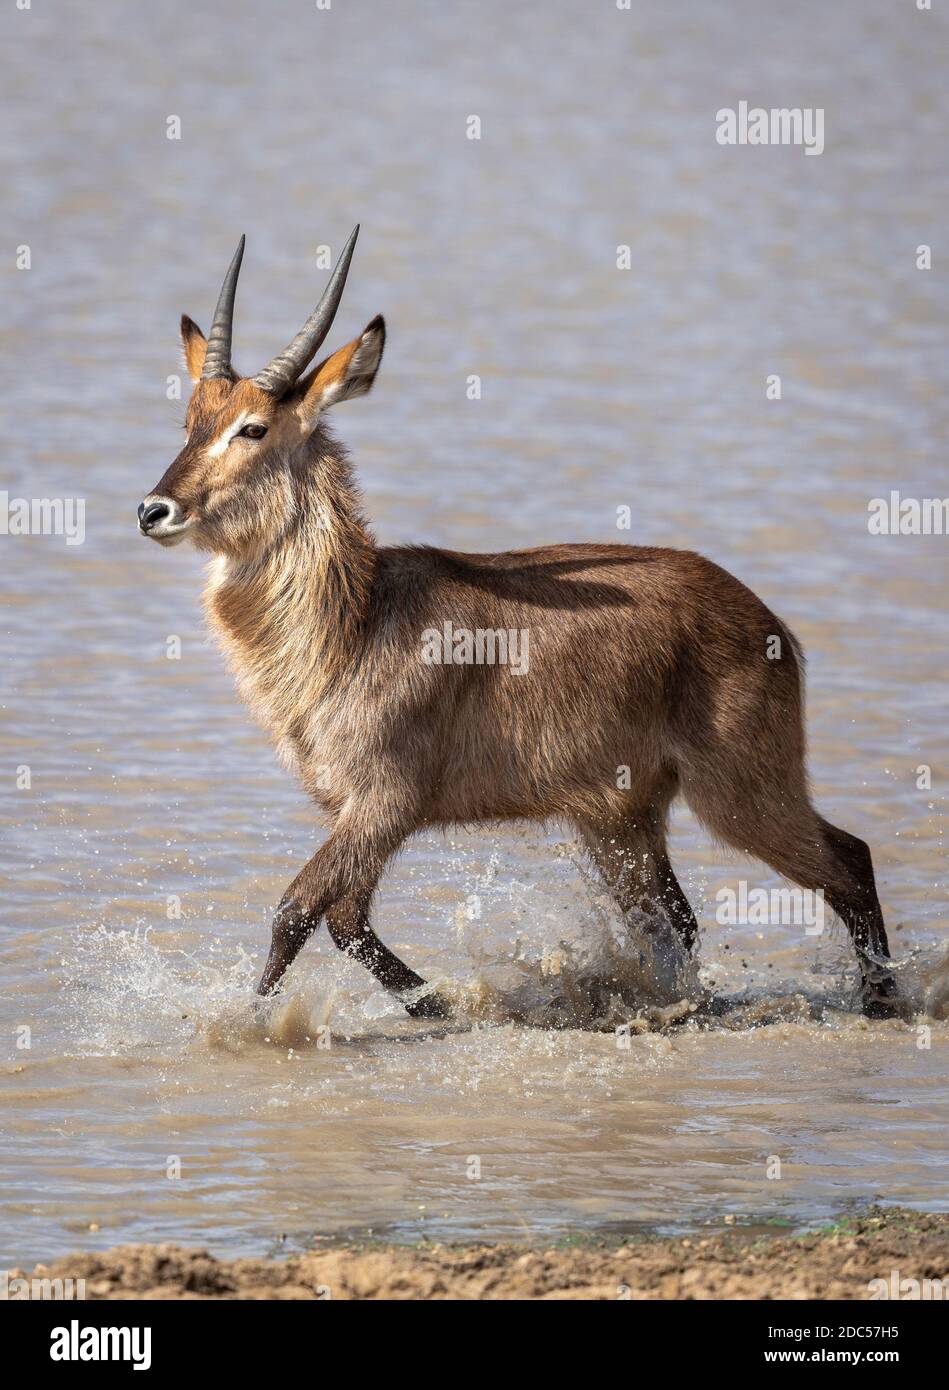 Adult waterbuck walking through water in Kruger Park in South Africa Stock Photo